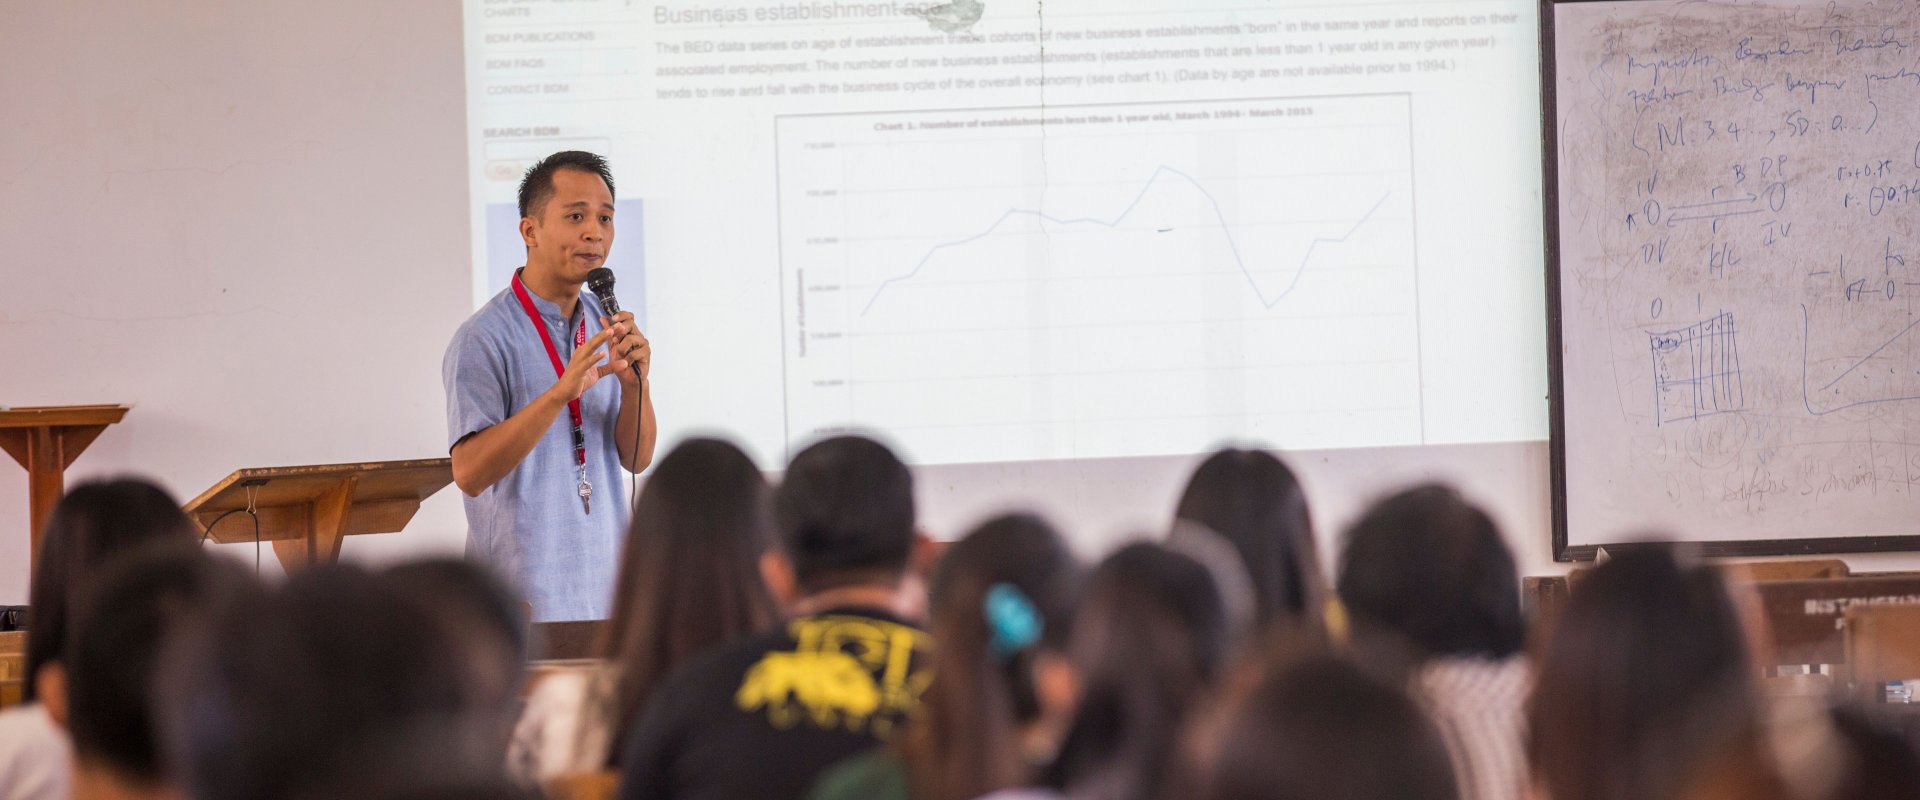 An Asian man stands at the front of a classroom full of students, present with a microphone and projection screen.